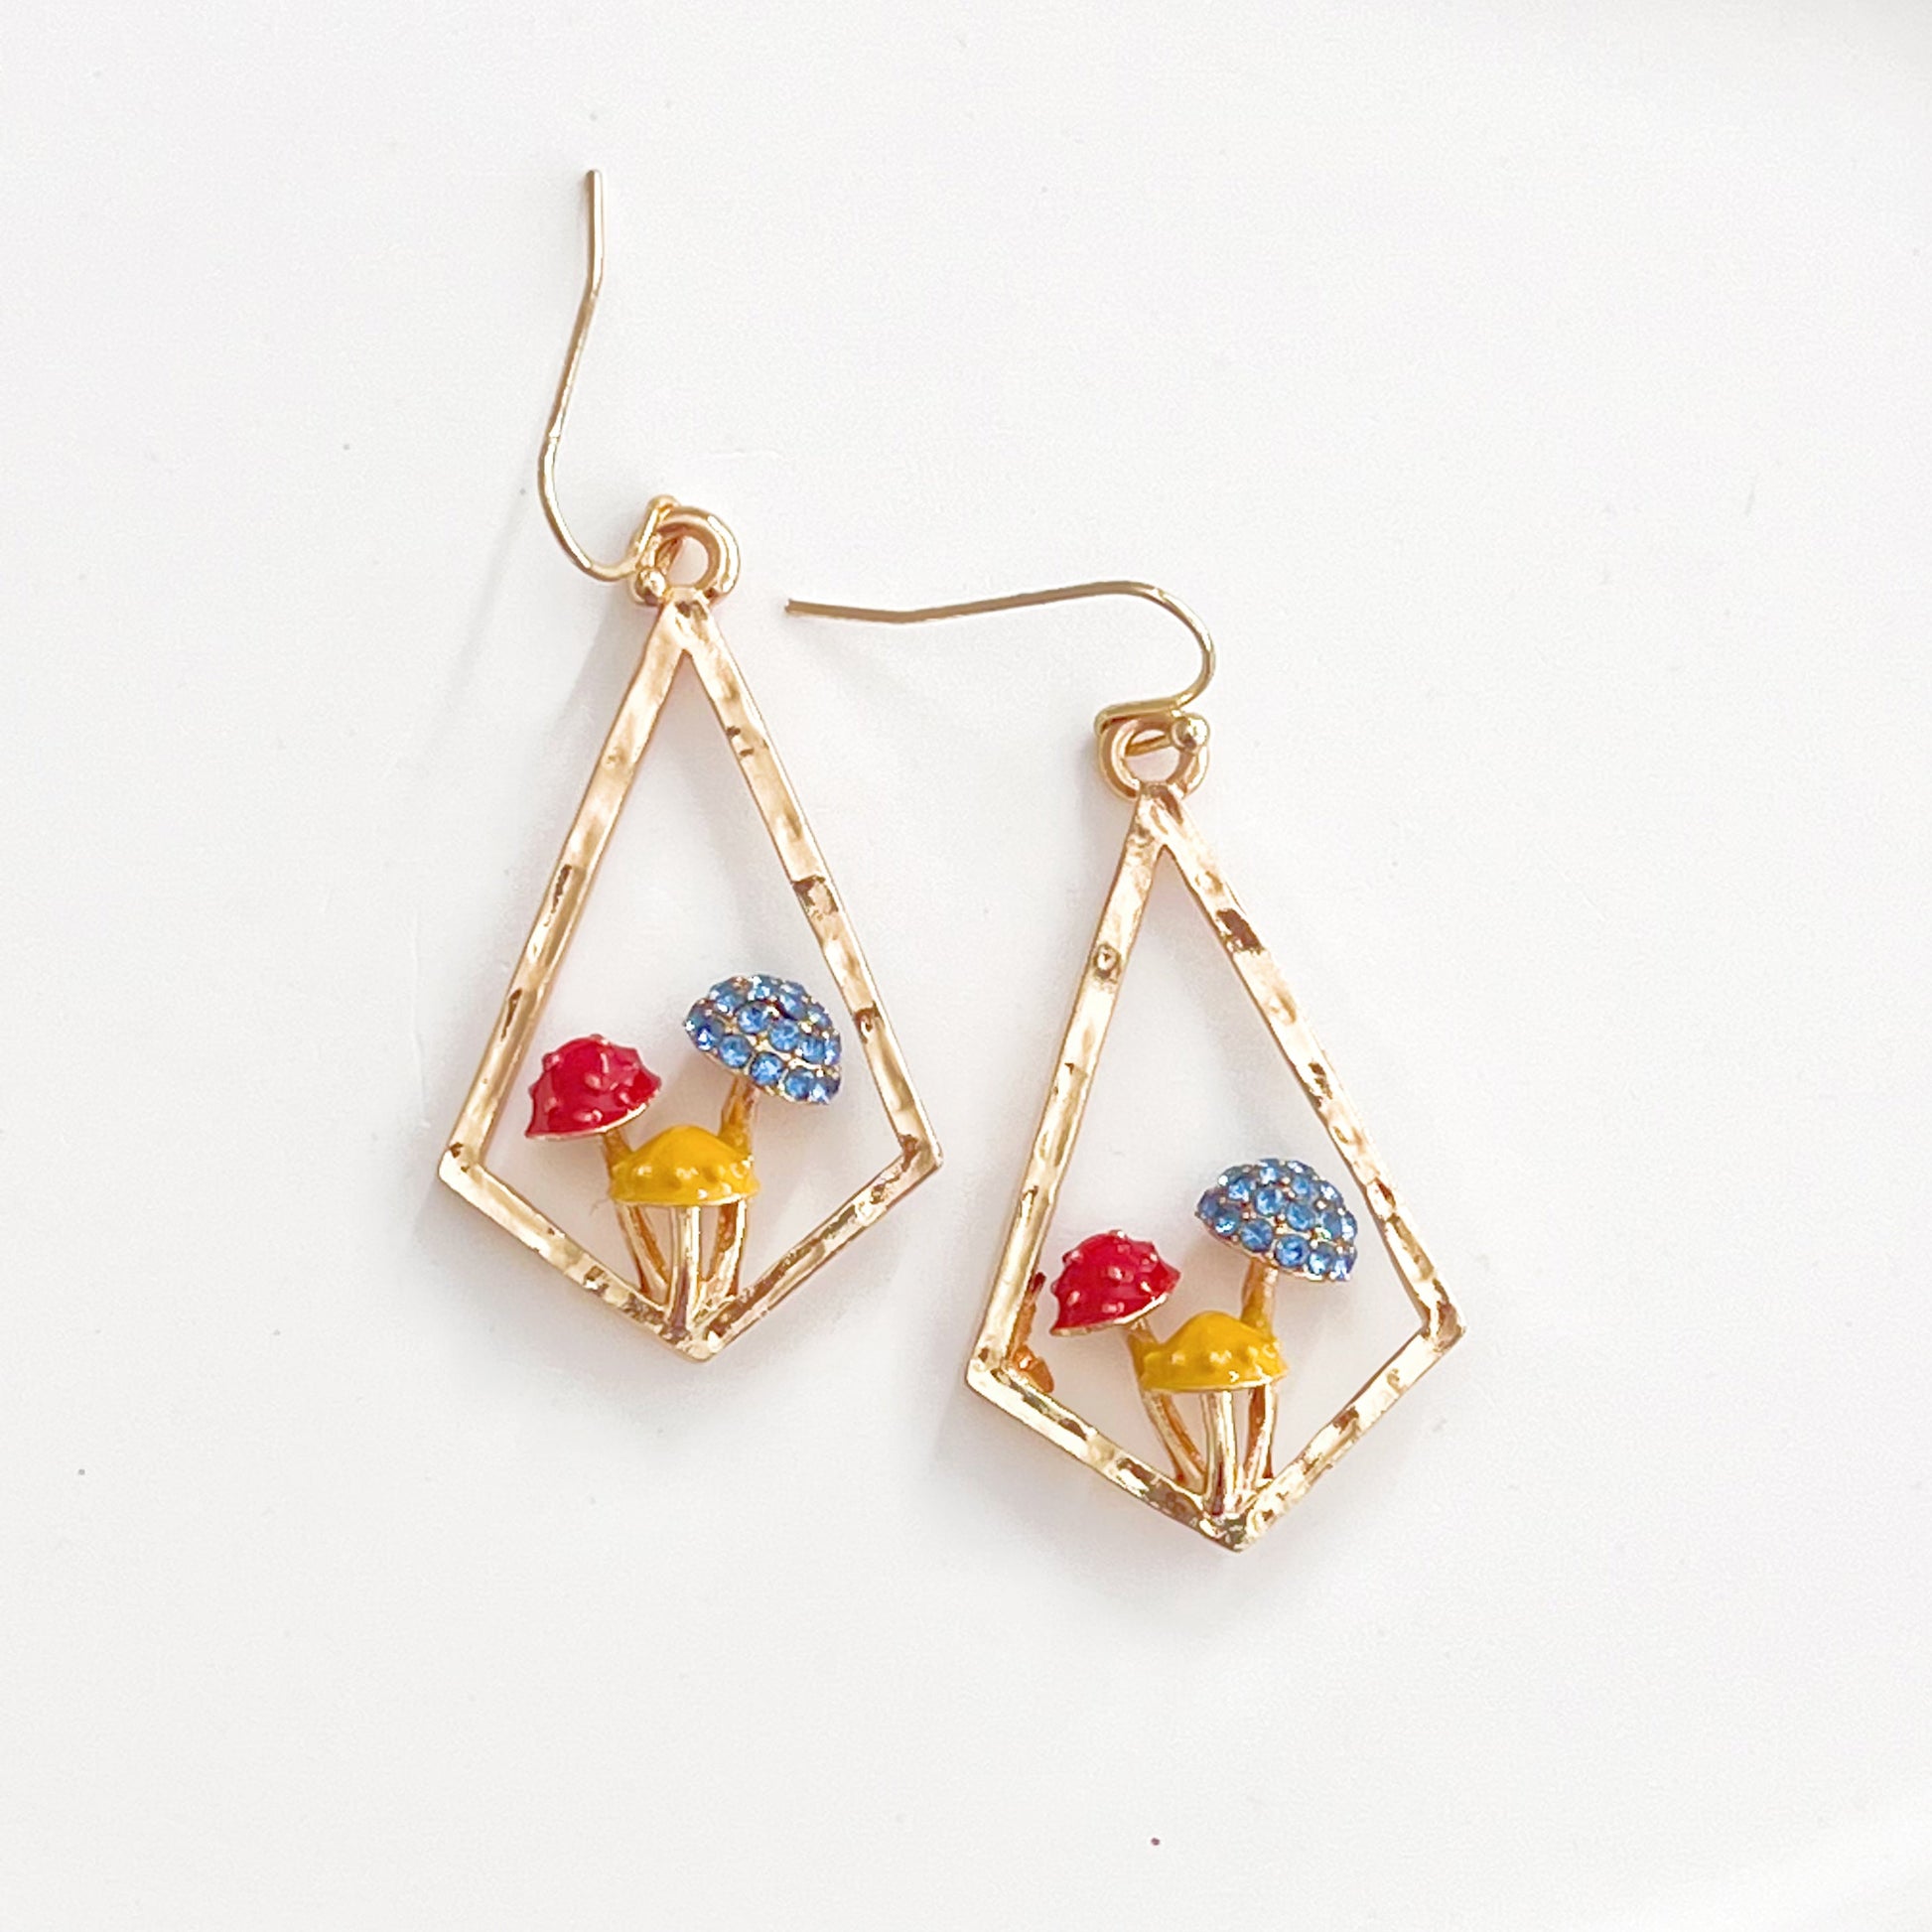 Red Fly Agaric Mushrooms in Gold Diamond Frame Good Luck Earrings-Ninaouity